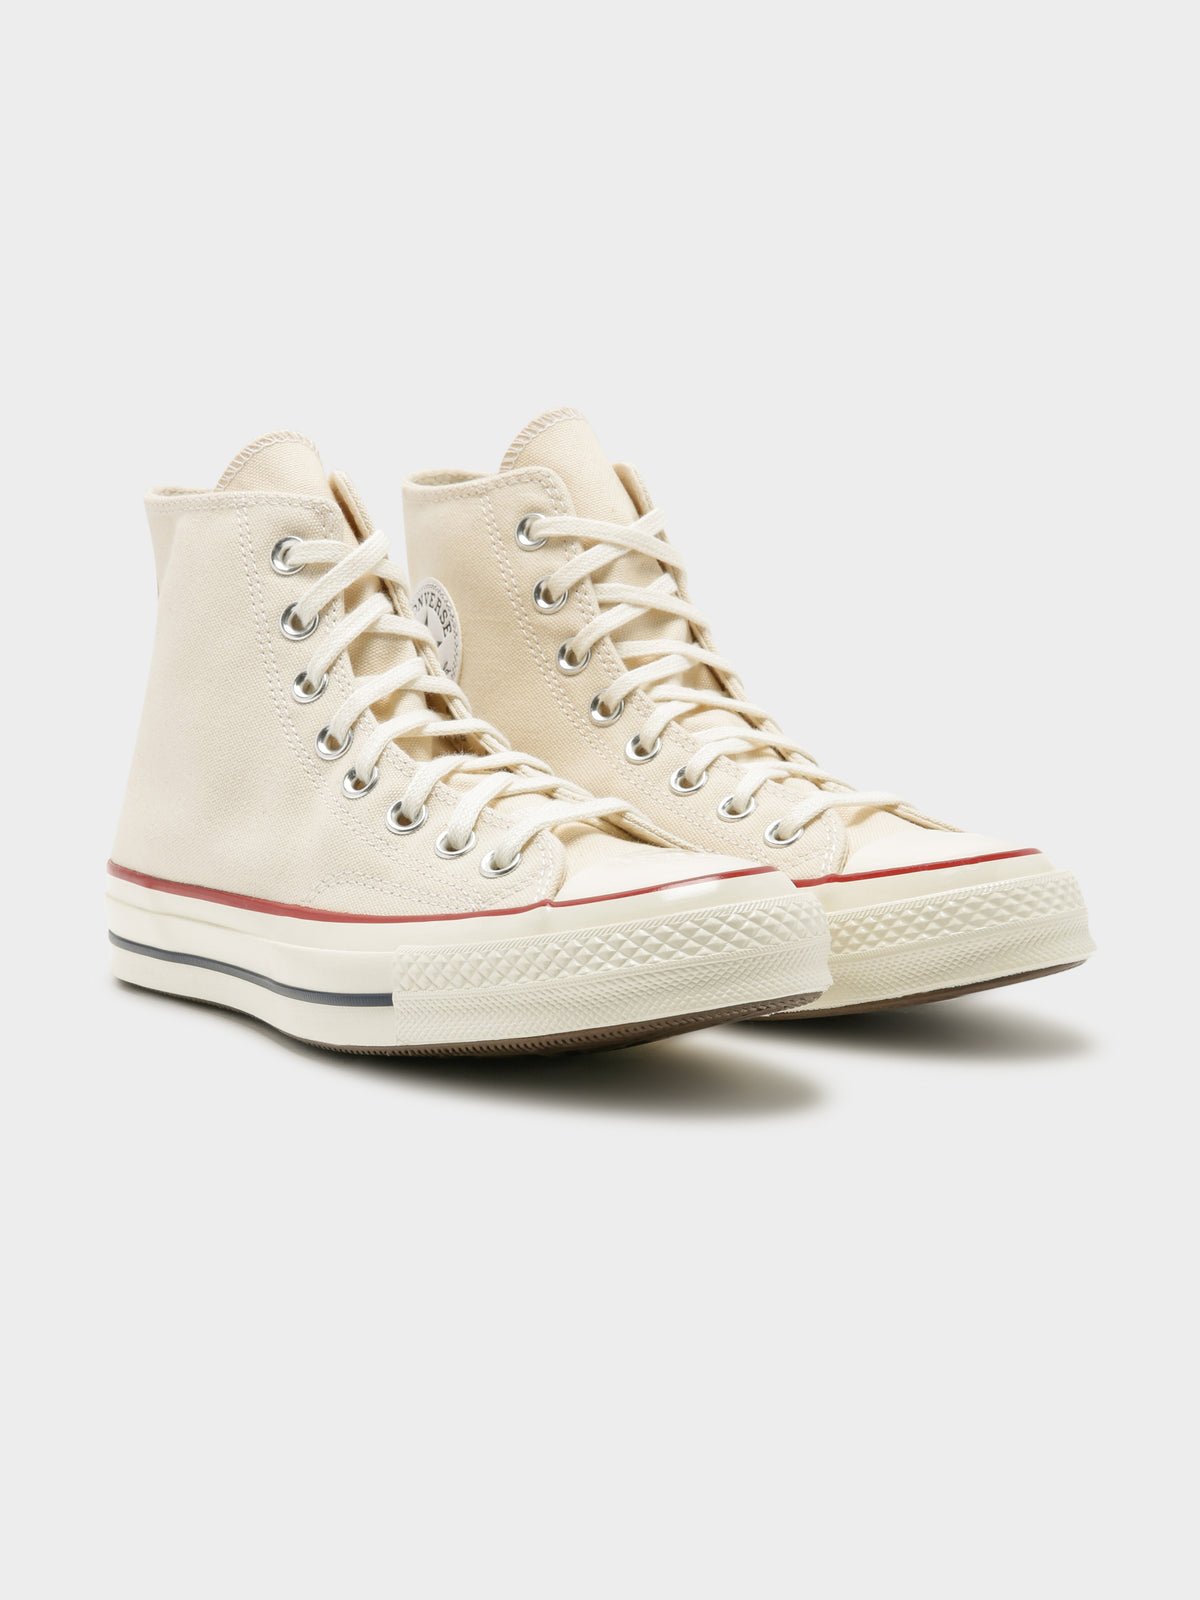 Unisex Chuck Taylor All Star 70 High Top Sneakers in Parchment